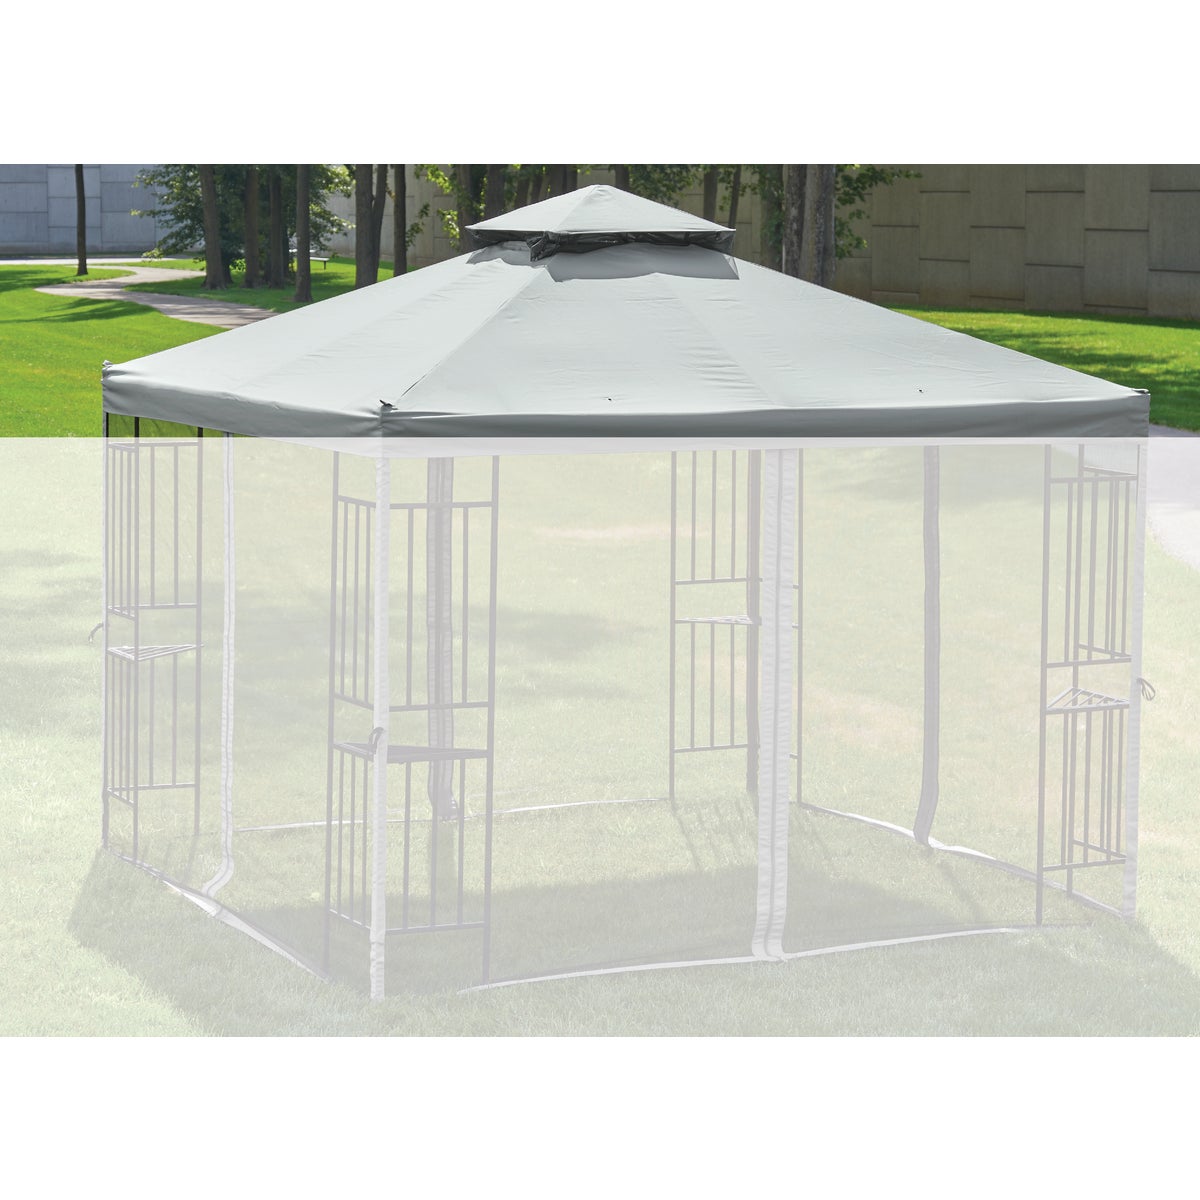 Outdoor Expressions TJSG-127-4*4-CANOPY Outdoor Expressions 13 Ft. x 13 Ft. Gray Polyester Replacement Gazebo Canopy TJSG-127-4*